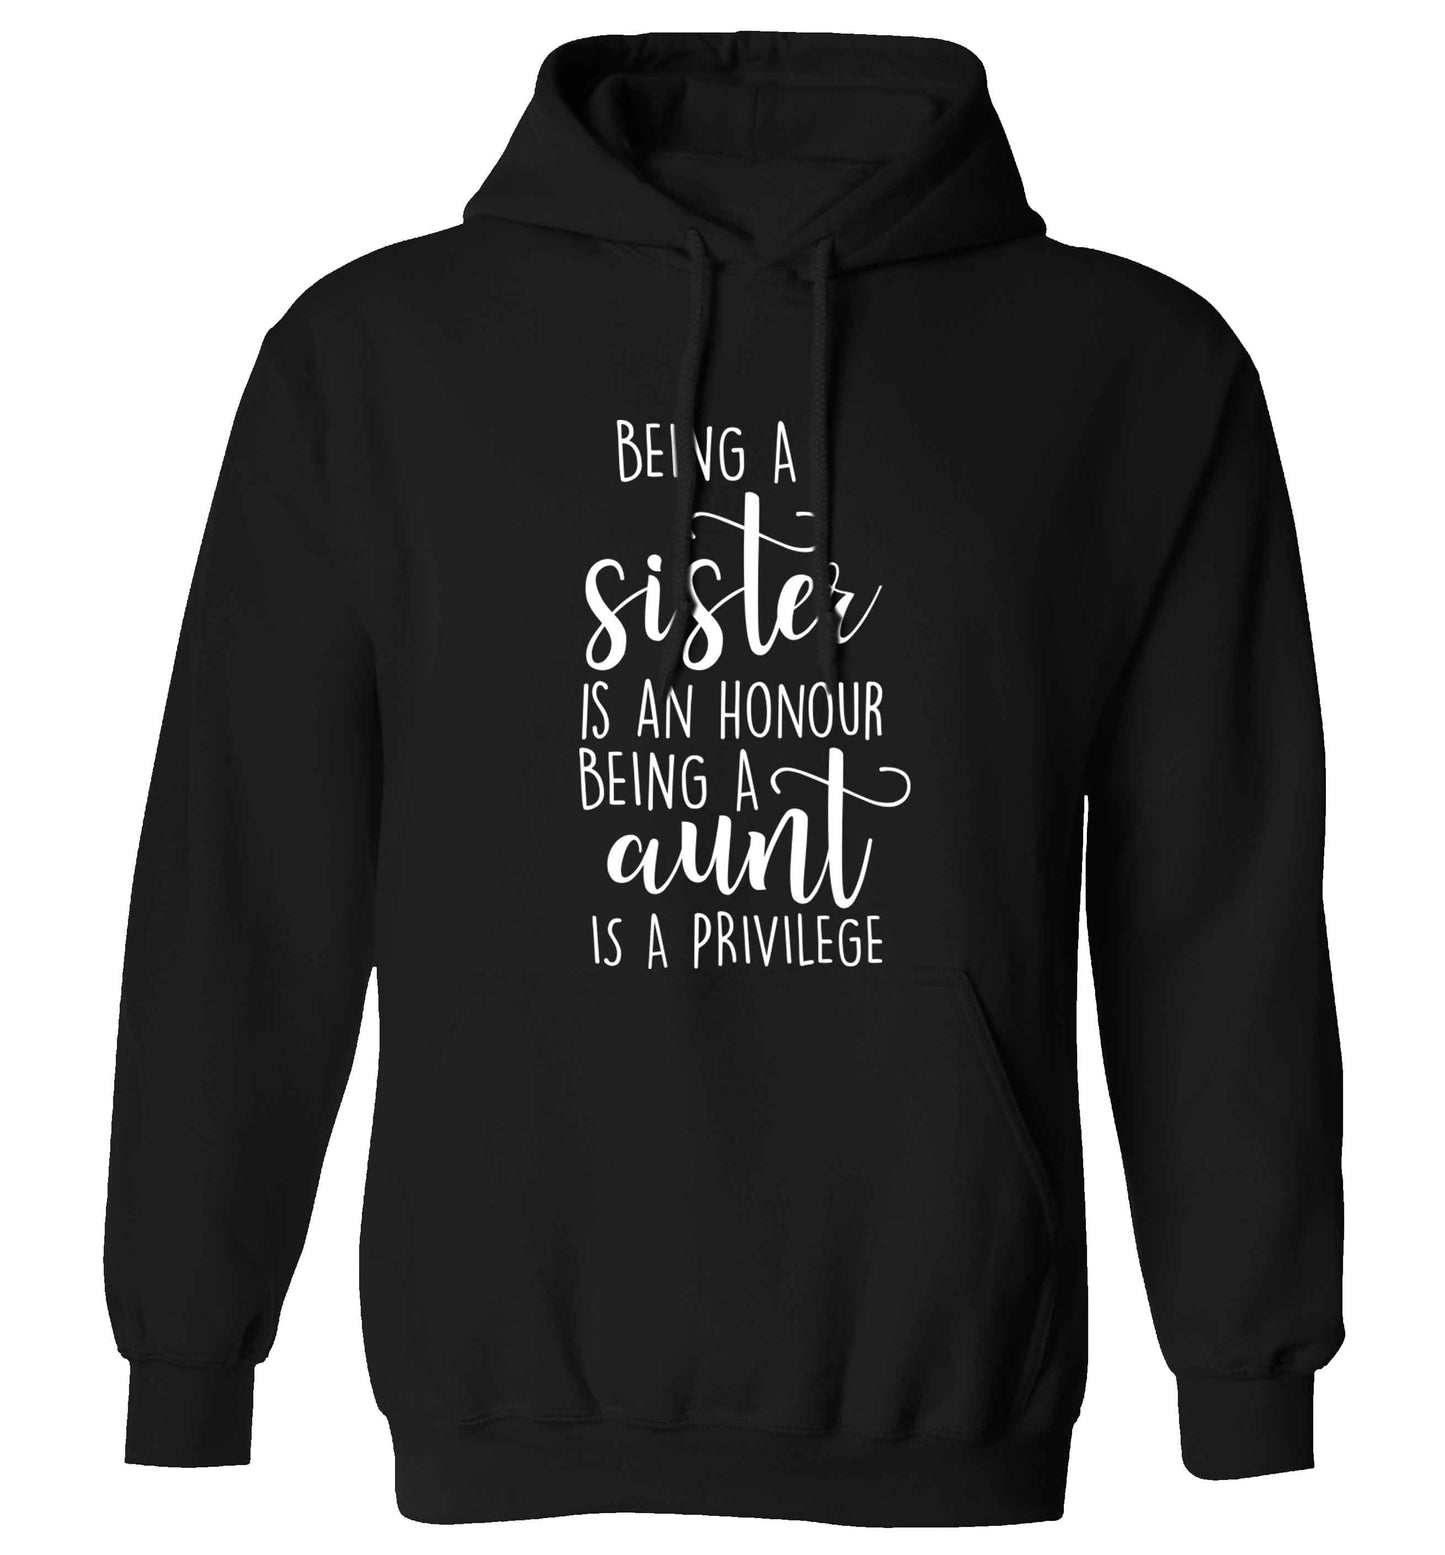 Being a sister is an honour being an auntie is a privilege adults unisex black hoodie 2XL